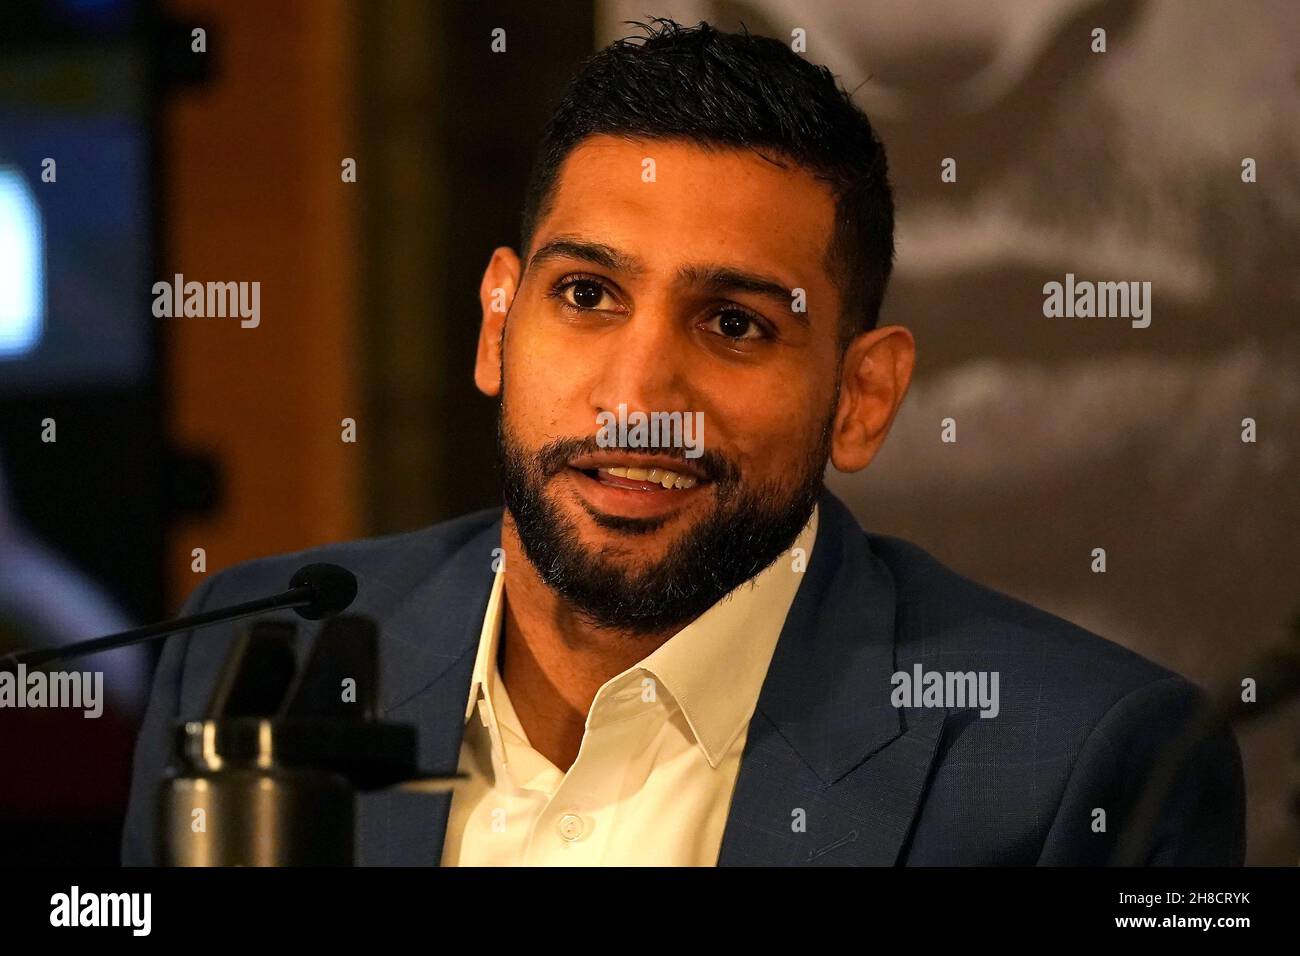 Amir Khan during a press conference at the London Hilton, London. Domestic rivals Amir Khan and Kell Brook will finally settle their long-running grudge on February 19. Picture date: Monday November 29, 2021. Stock Photo